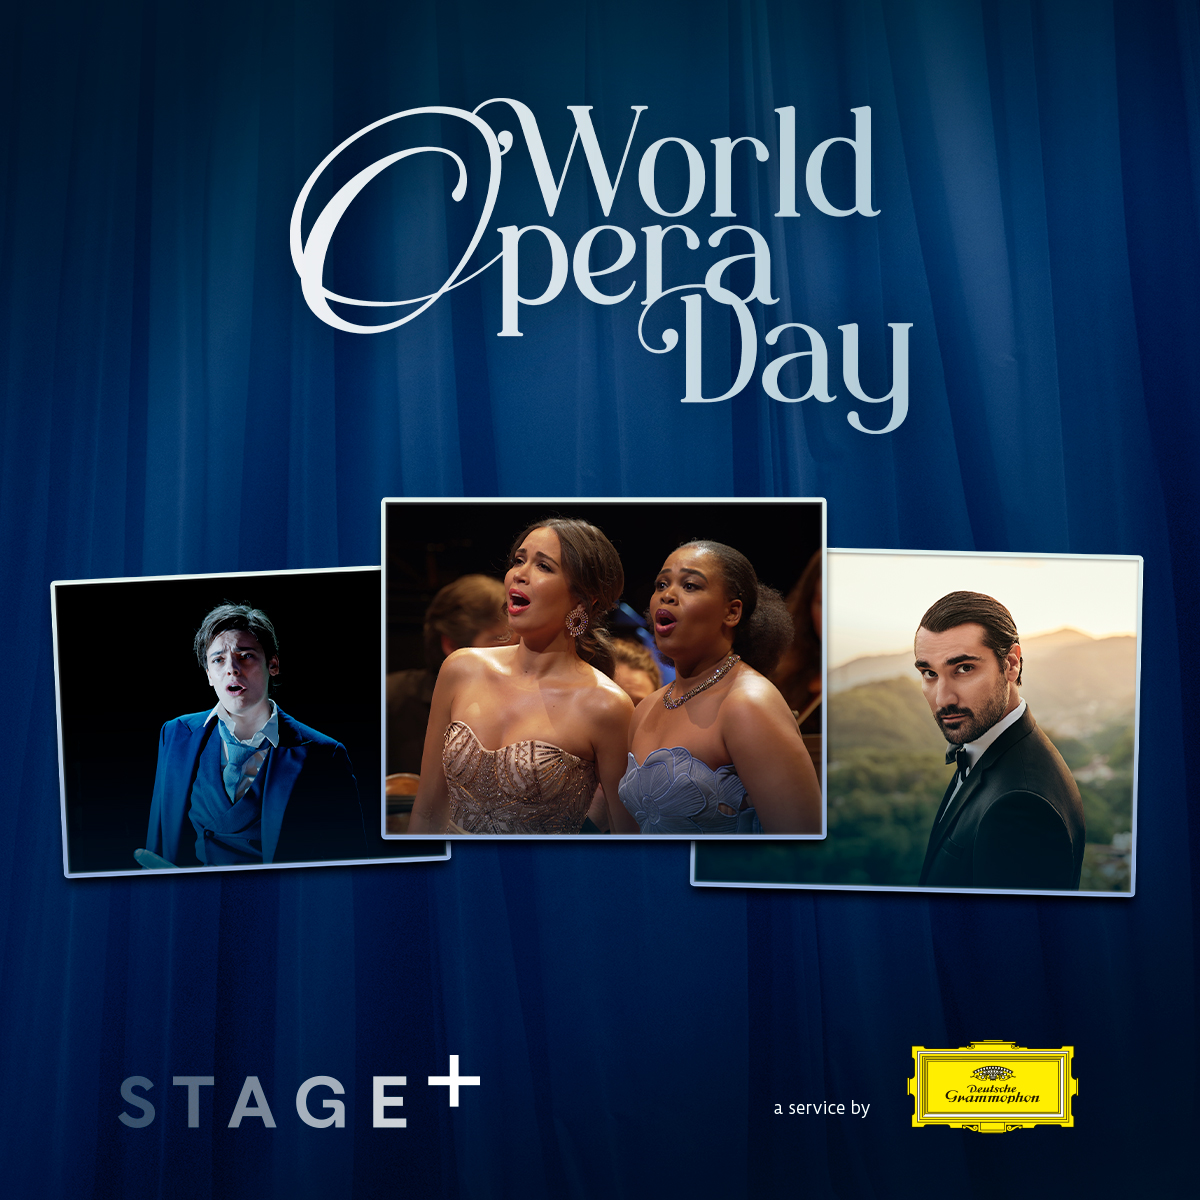 DG and @stageplusmusic celebrate World Opera Day, showcasing some of the most exciting singers of today. Get free access to STAGE+ for one month with the code ‘WORLDOPERADAY’. Visit world-opera-day.com for more information.